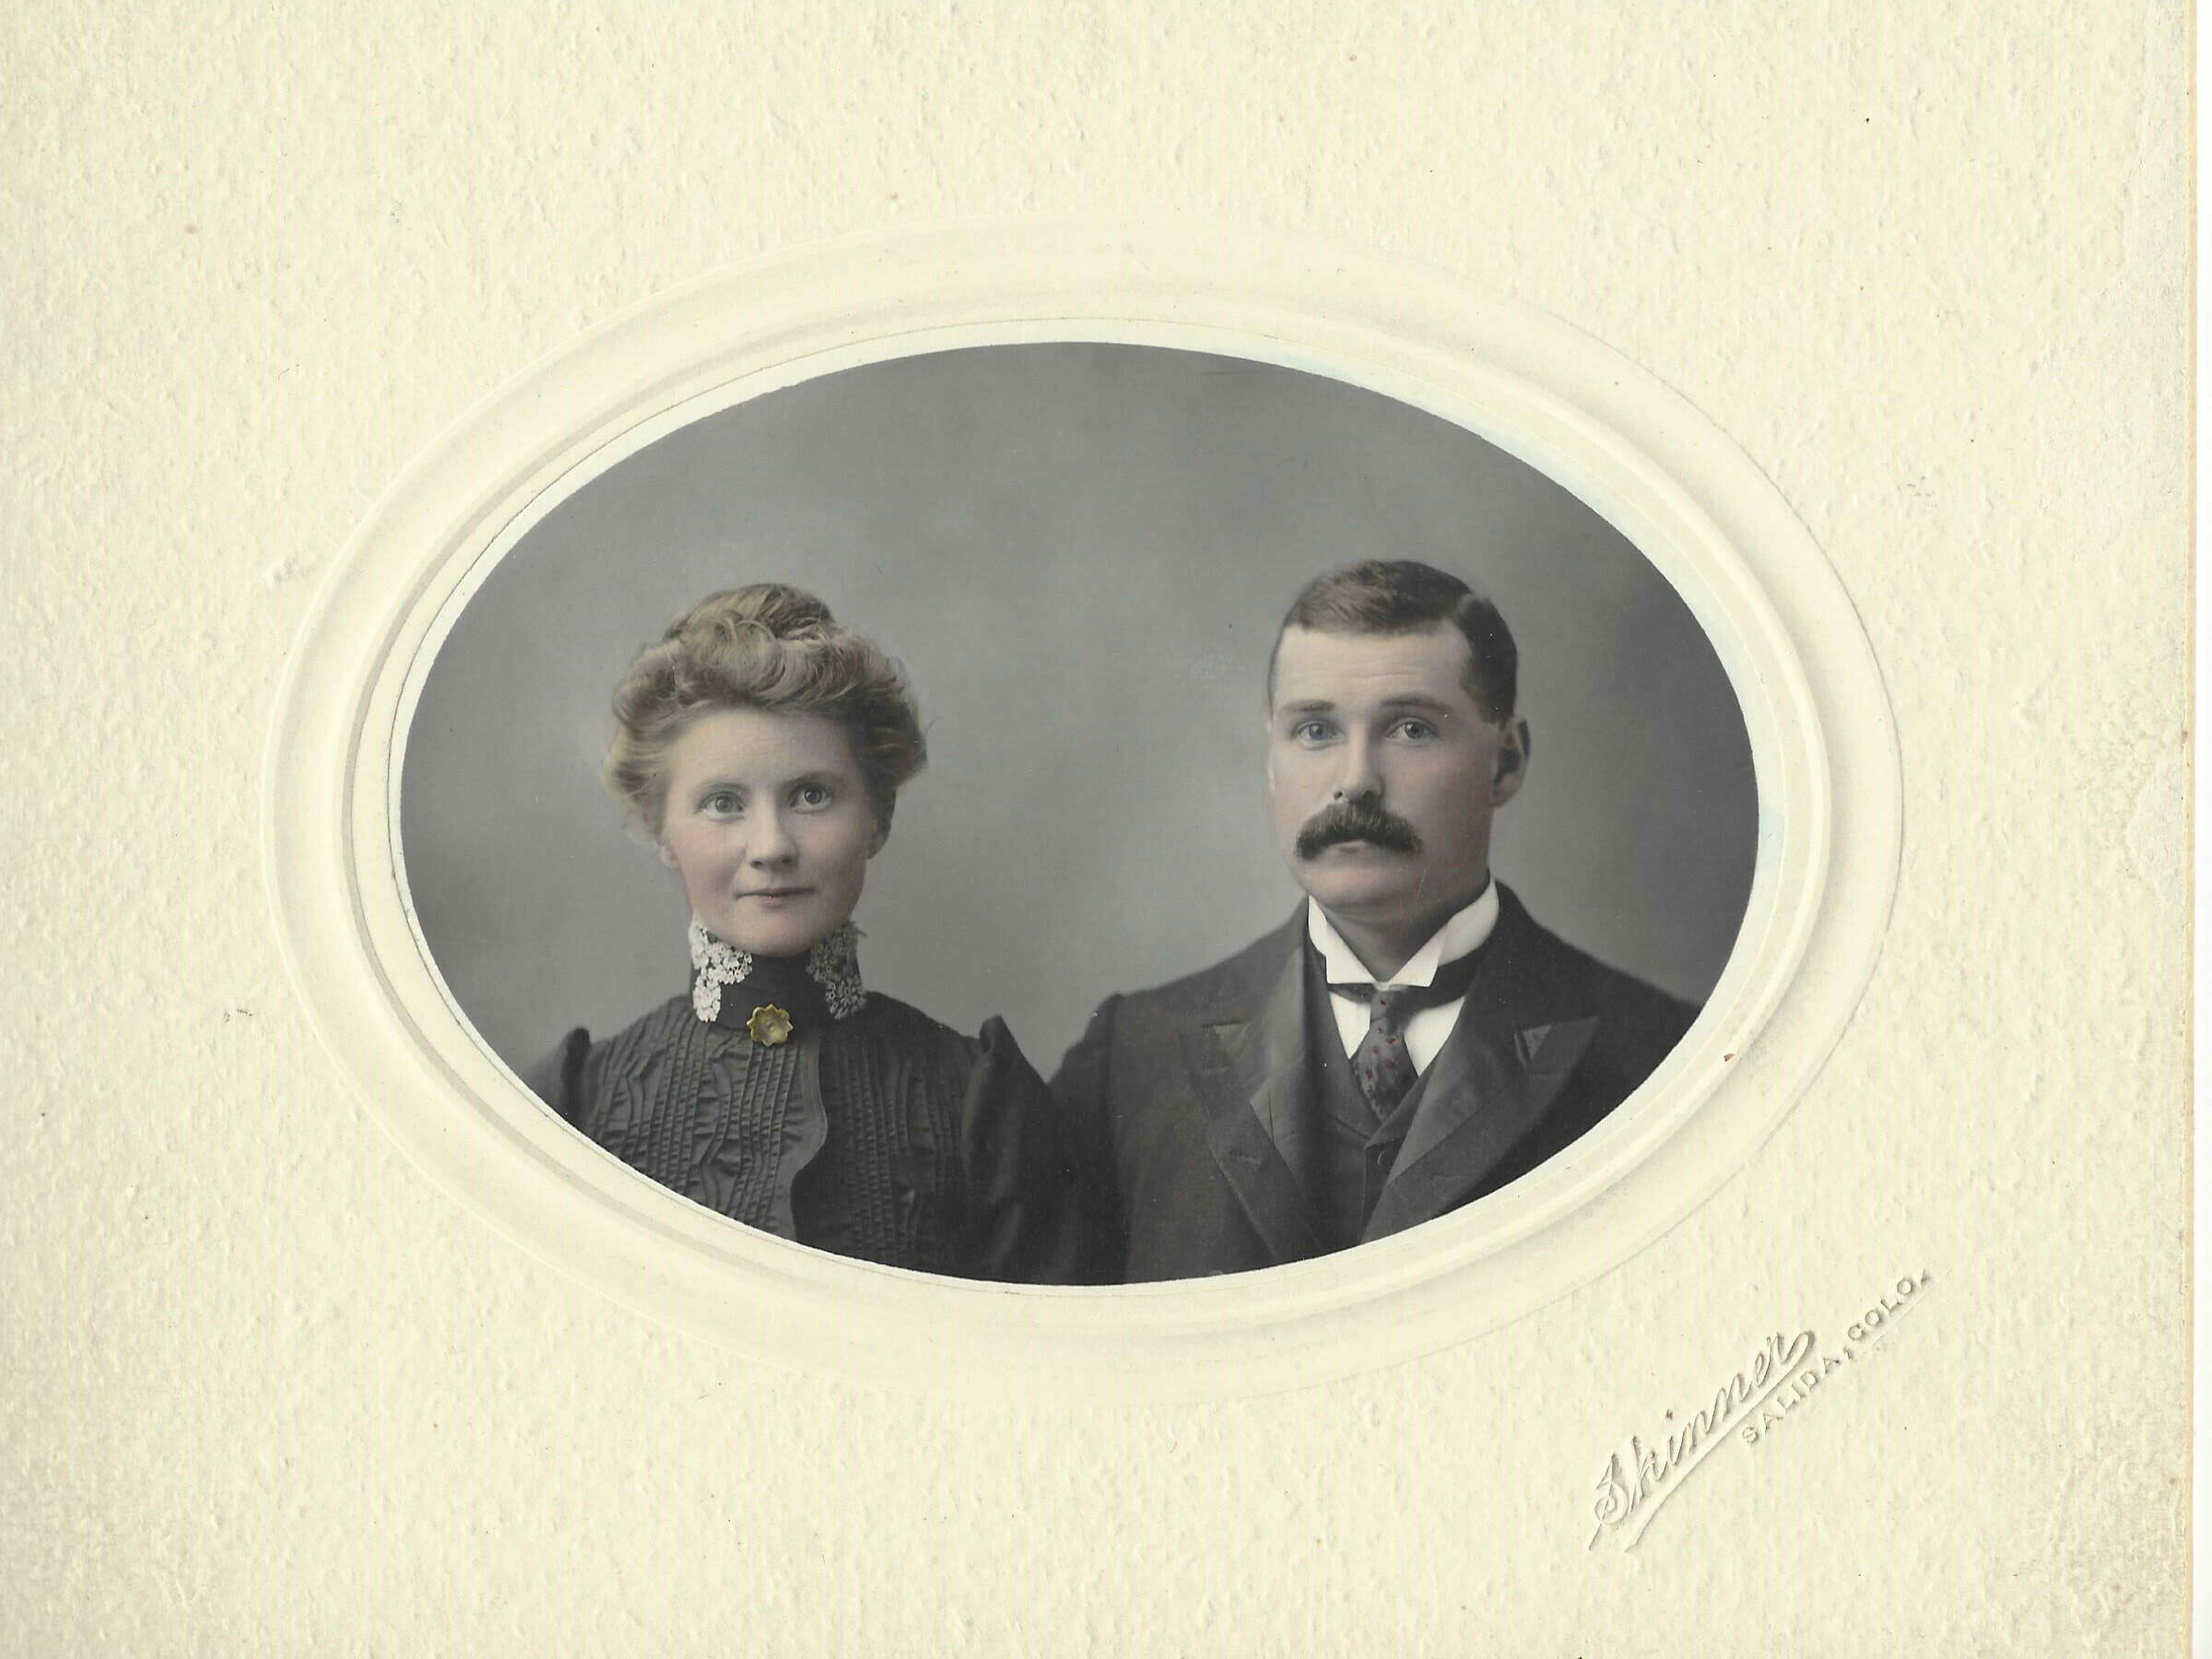 Frank and Gertrude Gimlett wedding photo Aug 1897 library’s collection